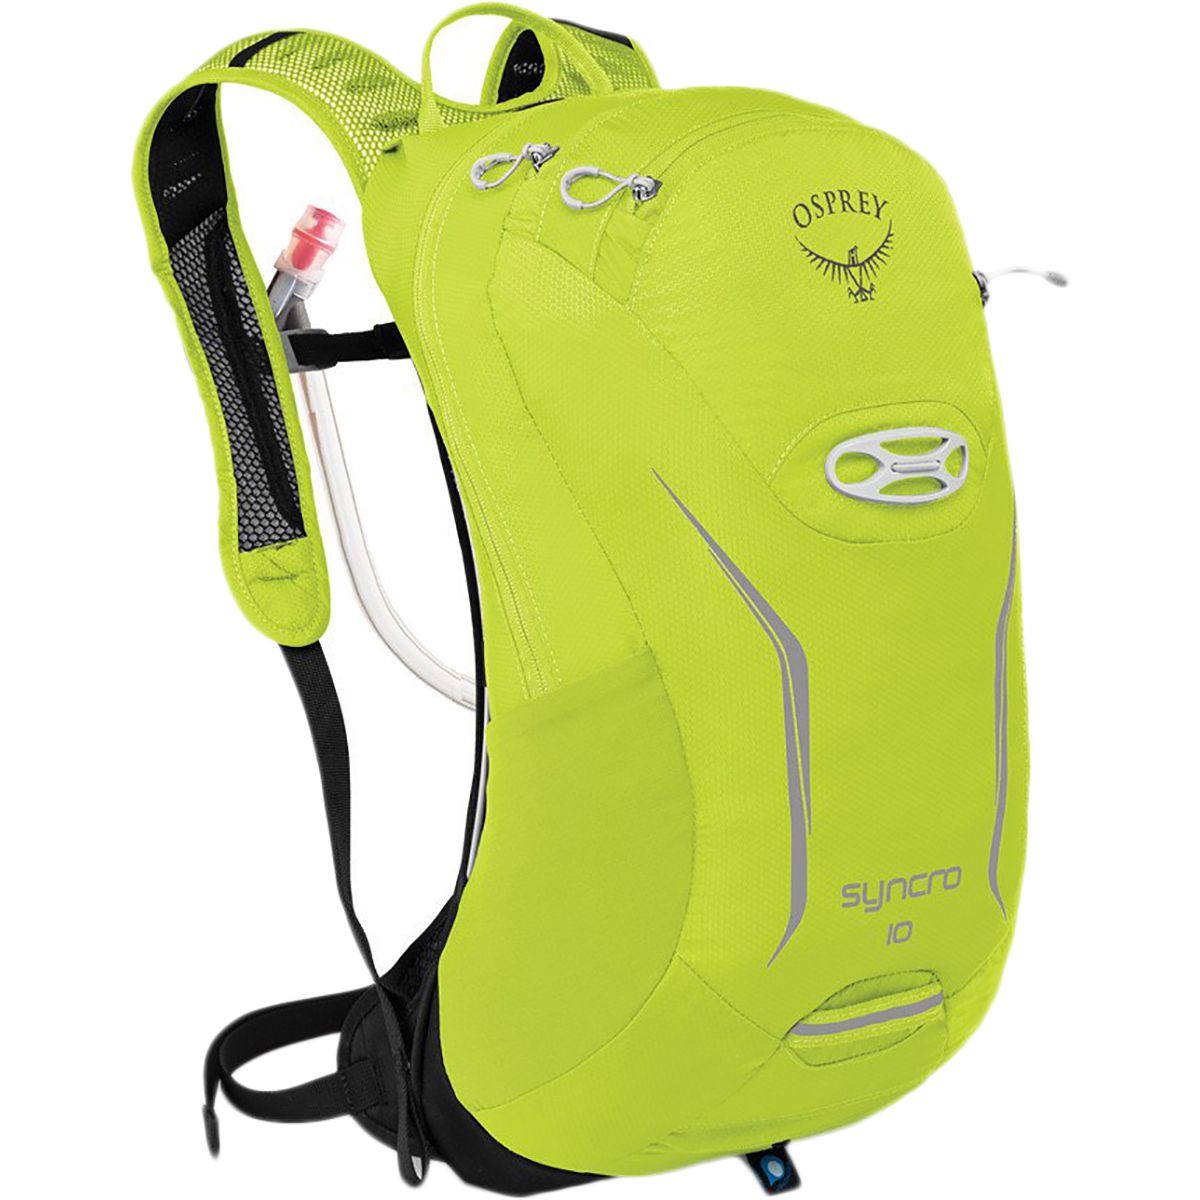 Osprey Packs Syncro 10 Hydration Backpack - 488-610cu in 